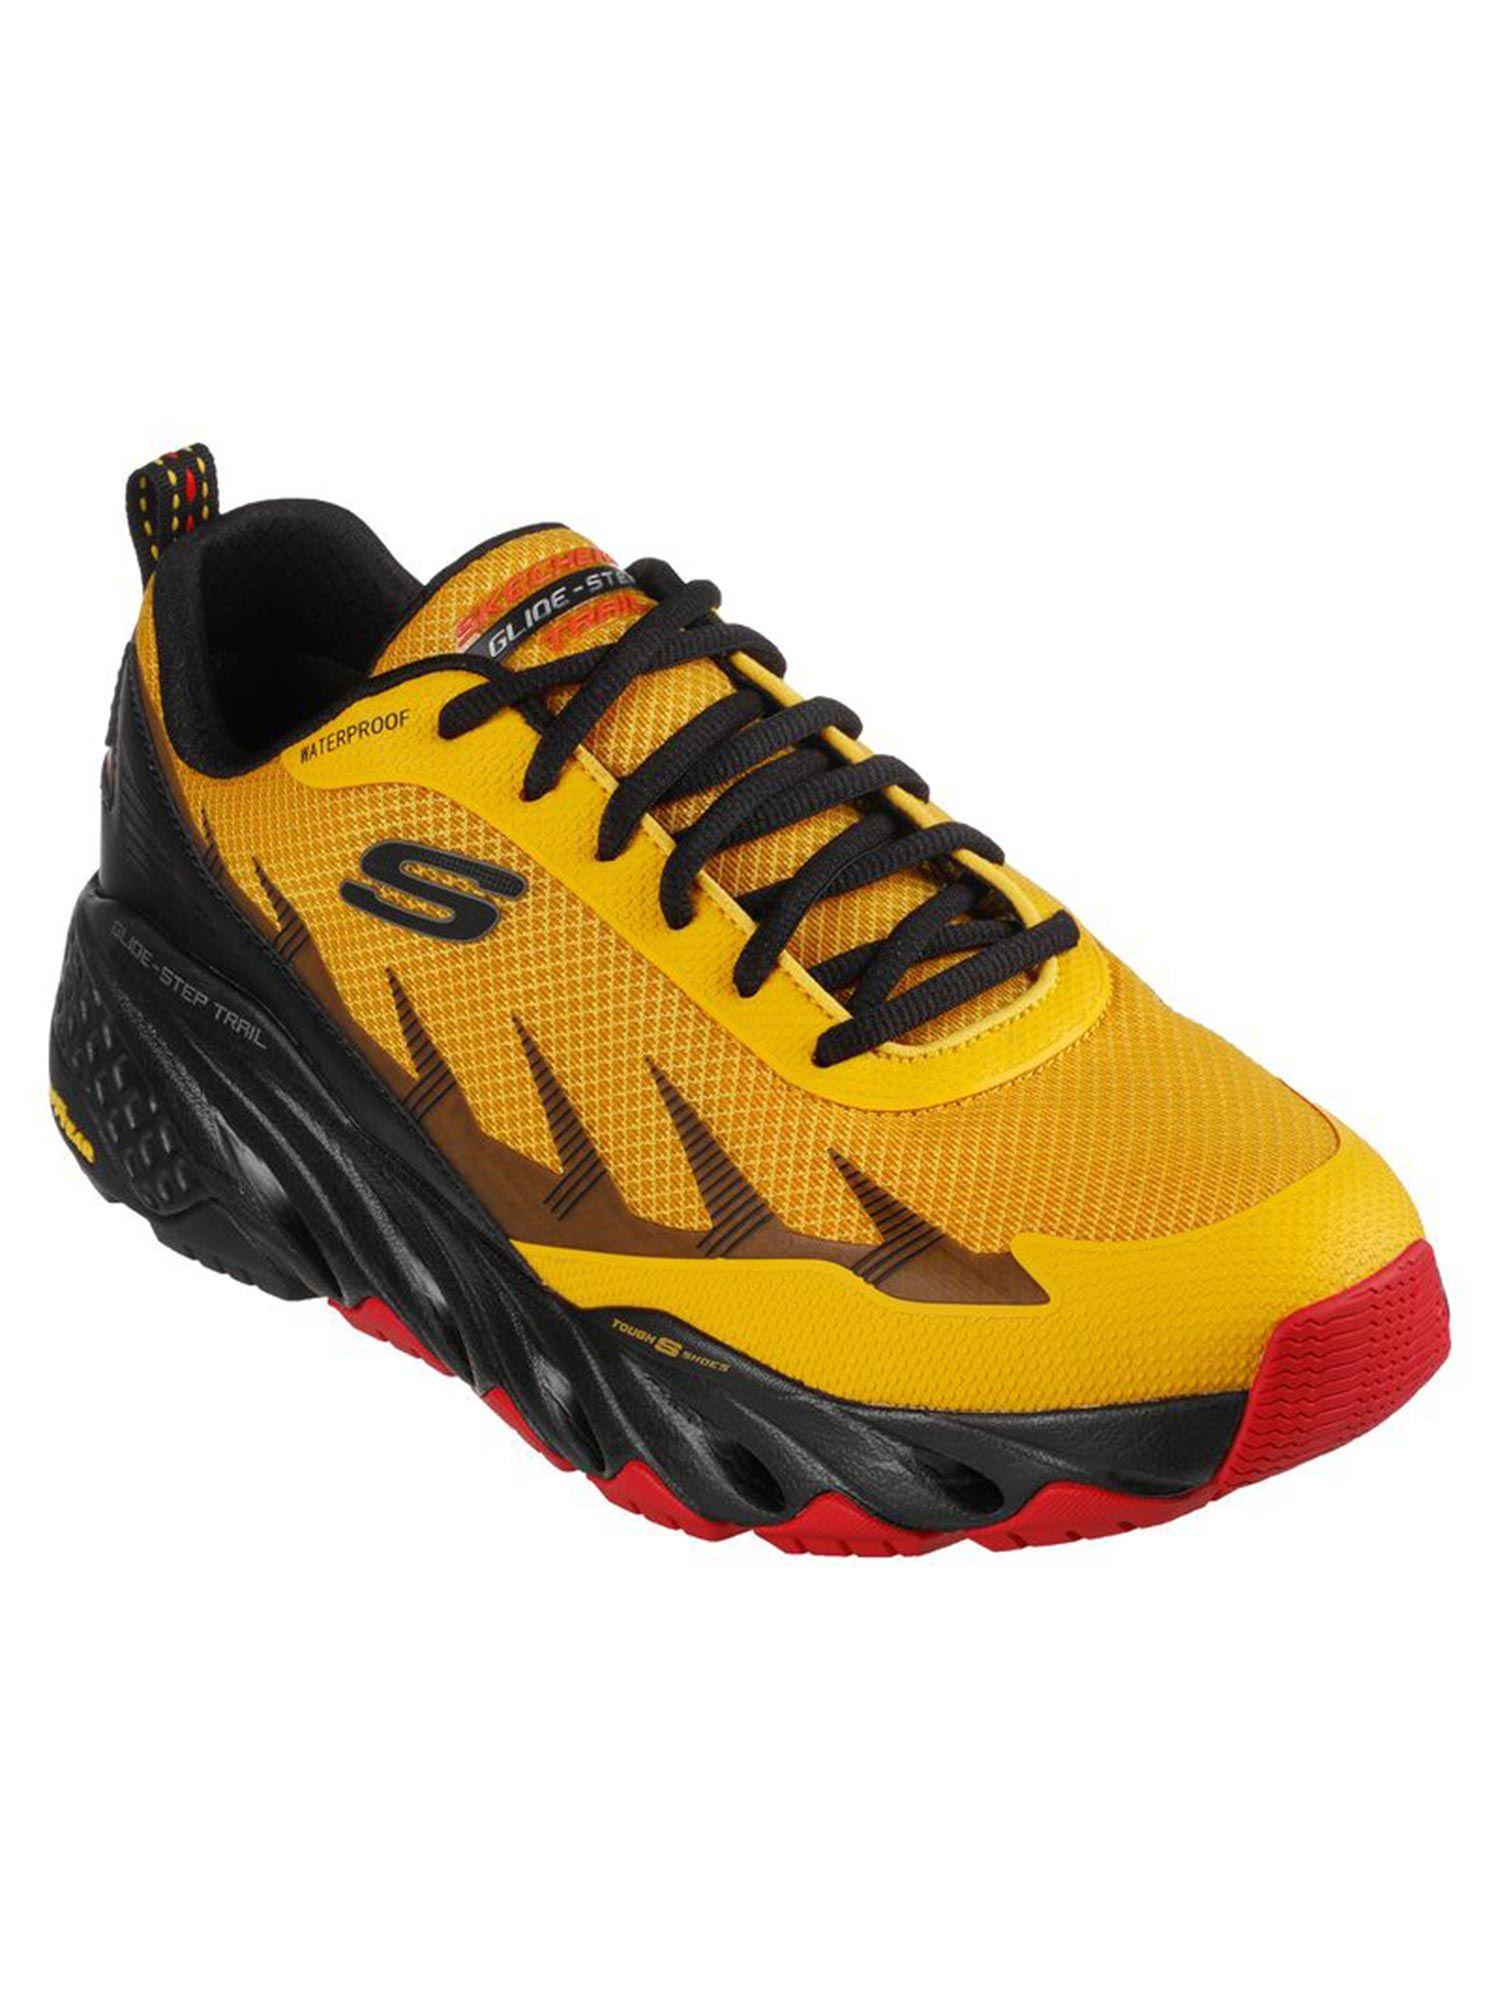 glide-step trail - botanic yellow street casual shoes